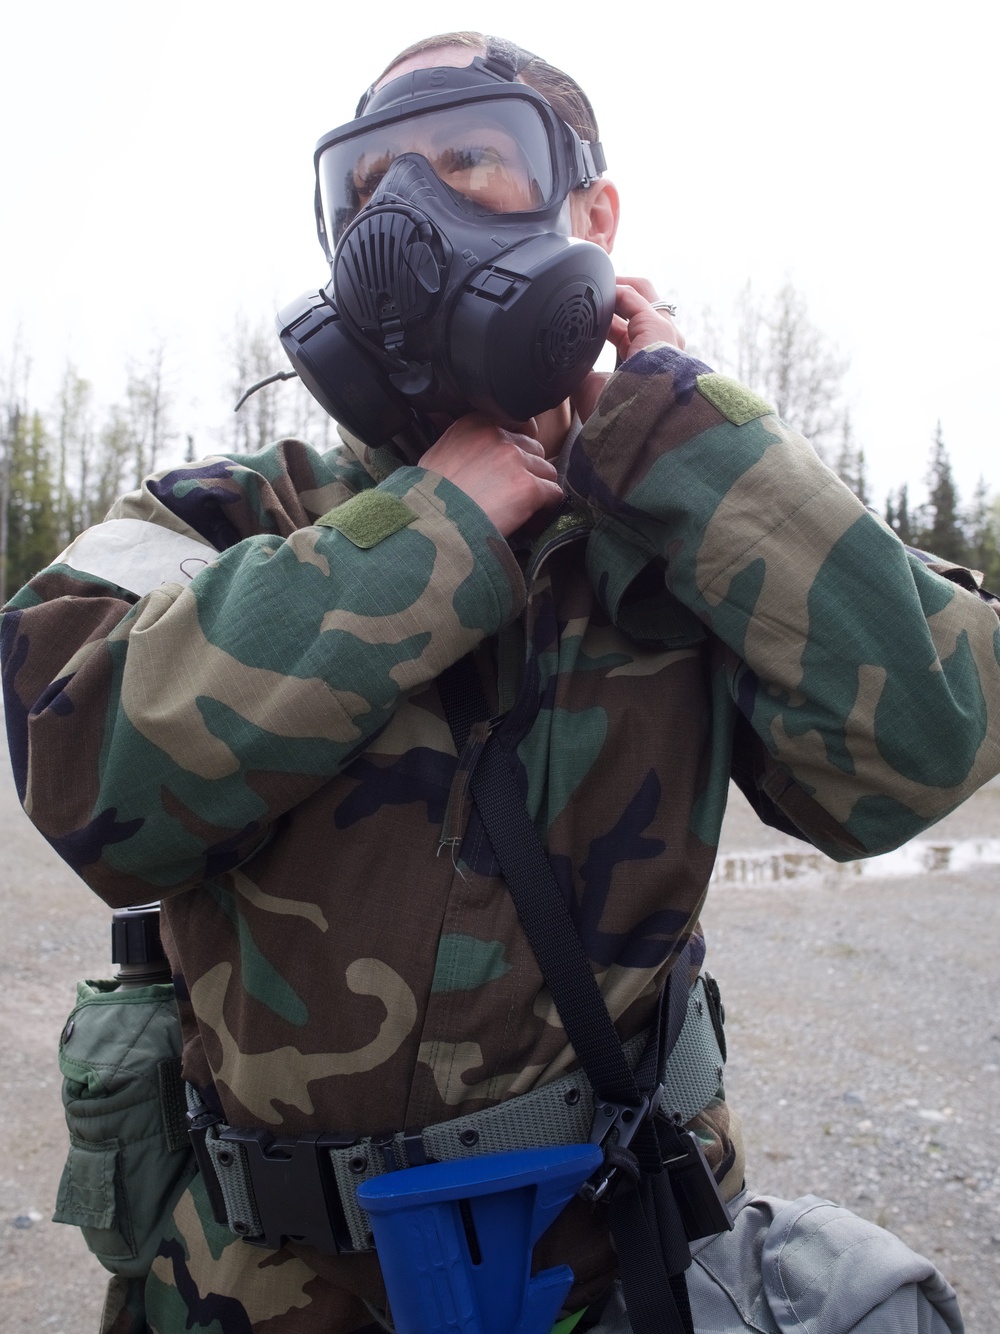 Midnight Sun Guardians train to be Agile Combat Employment leaders